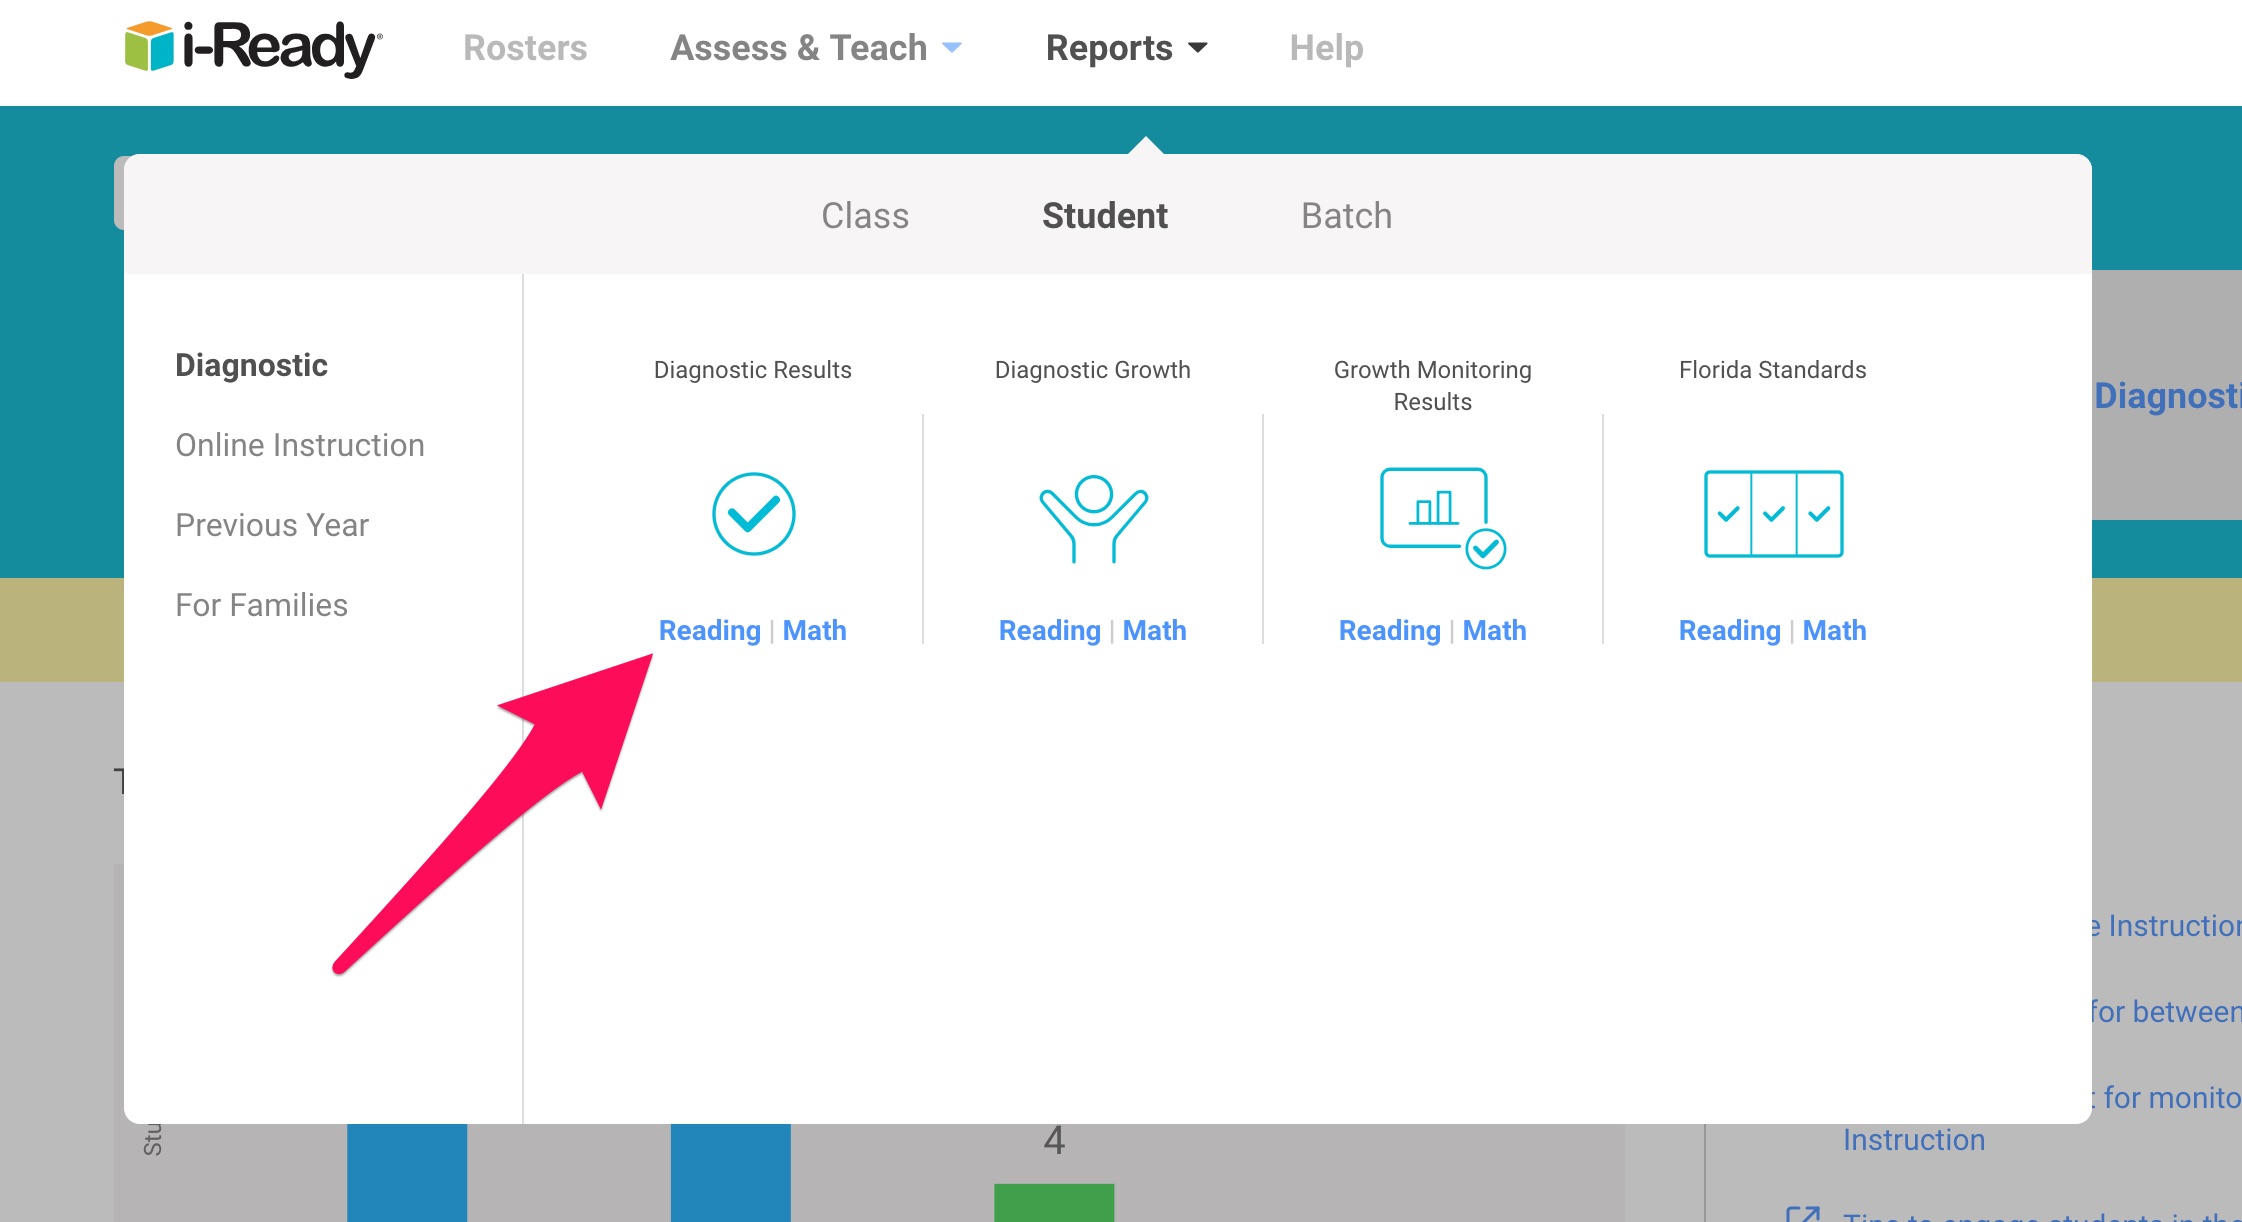 iReady is a technology based program used to improve students Reading and Math performance. However, in order for it to work, you have to know how to effectively monitor and track students' progress. This post has great ideas on how to do this in order to ensure your kiddos succeed!